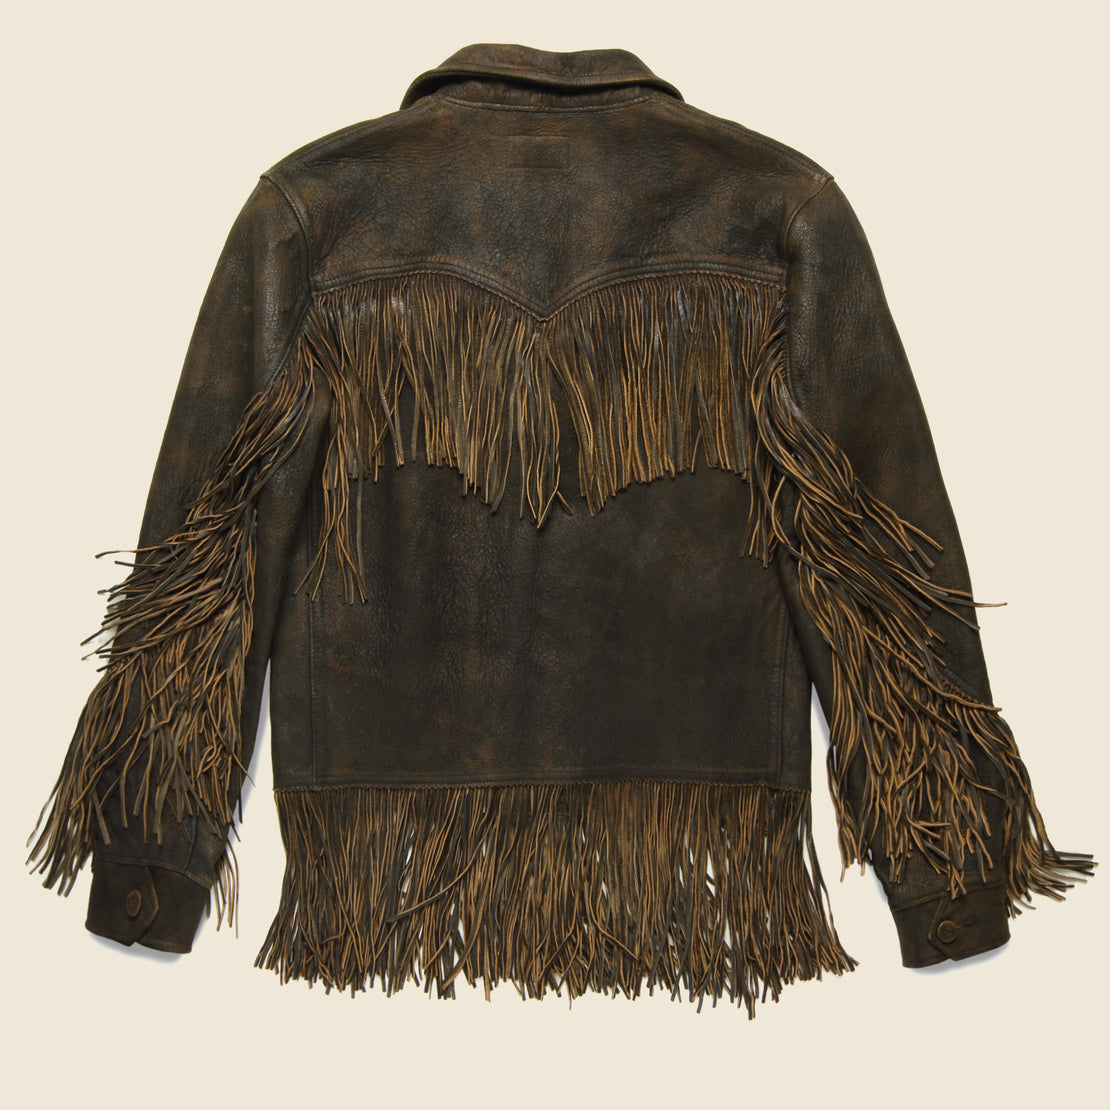 Atwood Fringe Jacket - Deep Brown - RRL - STAG Provisions - W - Outerwear - Coat/Jacket